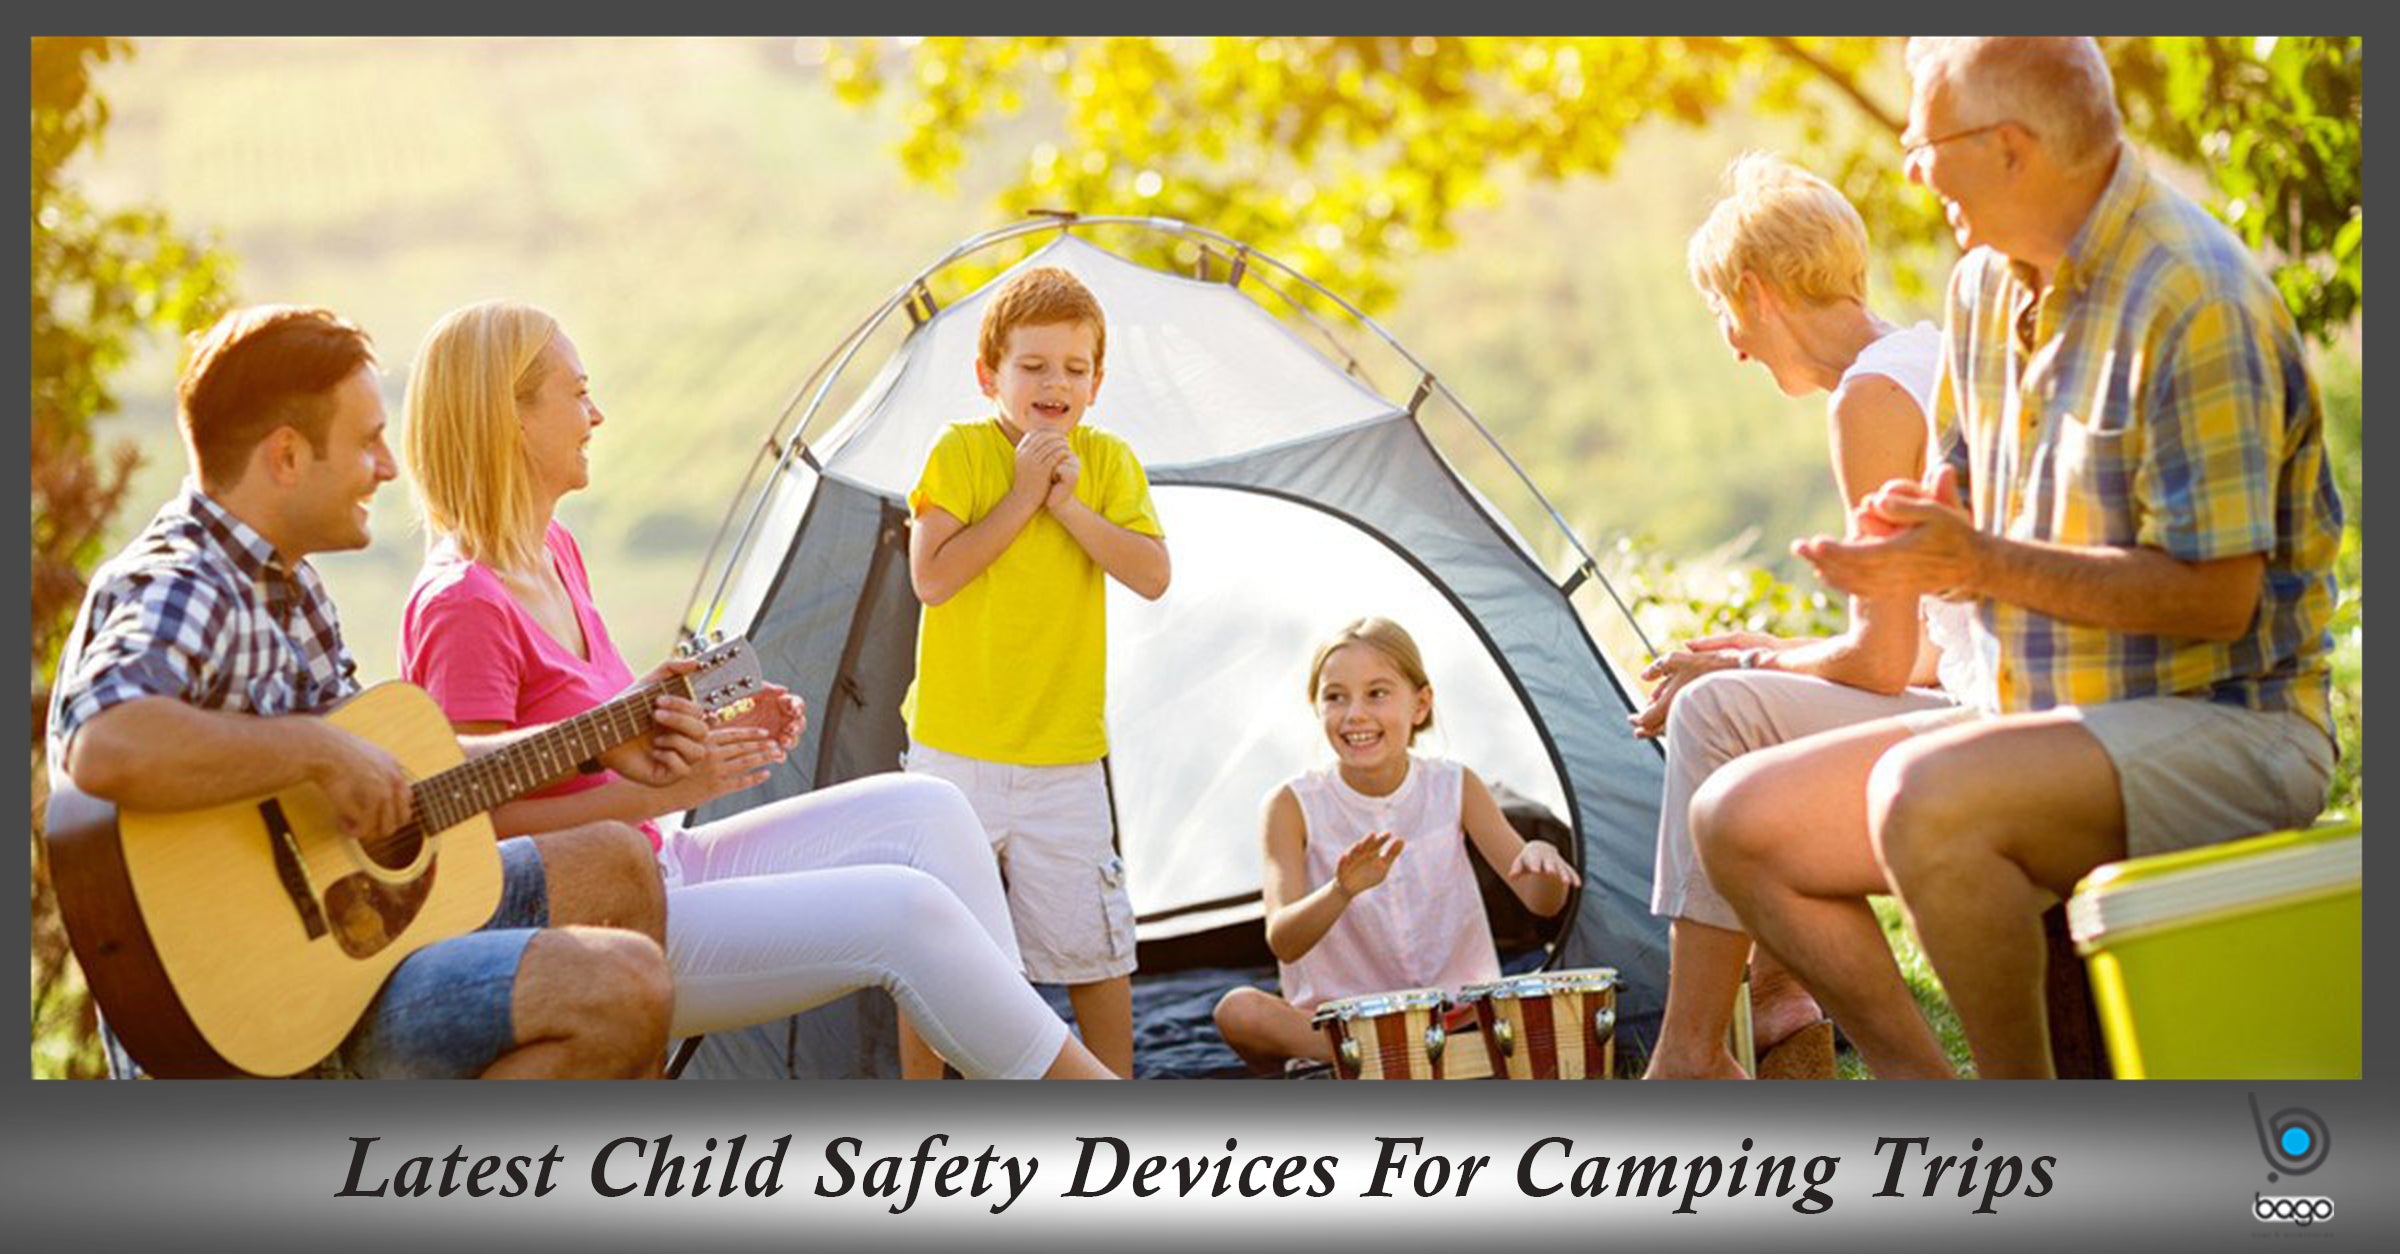 Latest Child Safety Devices For Camping Trips